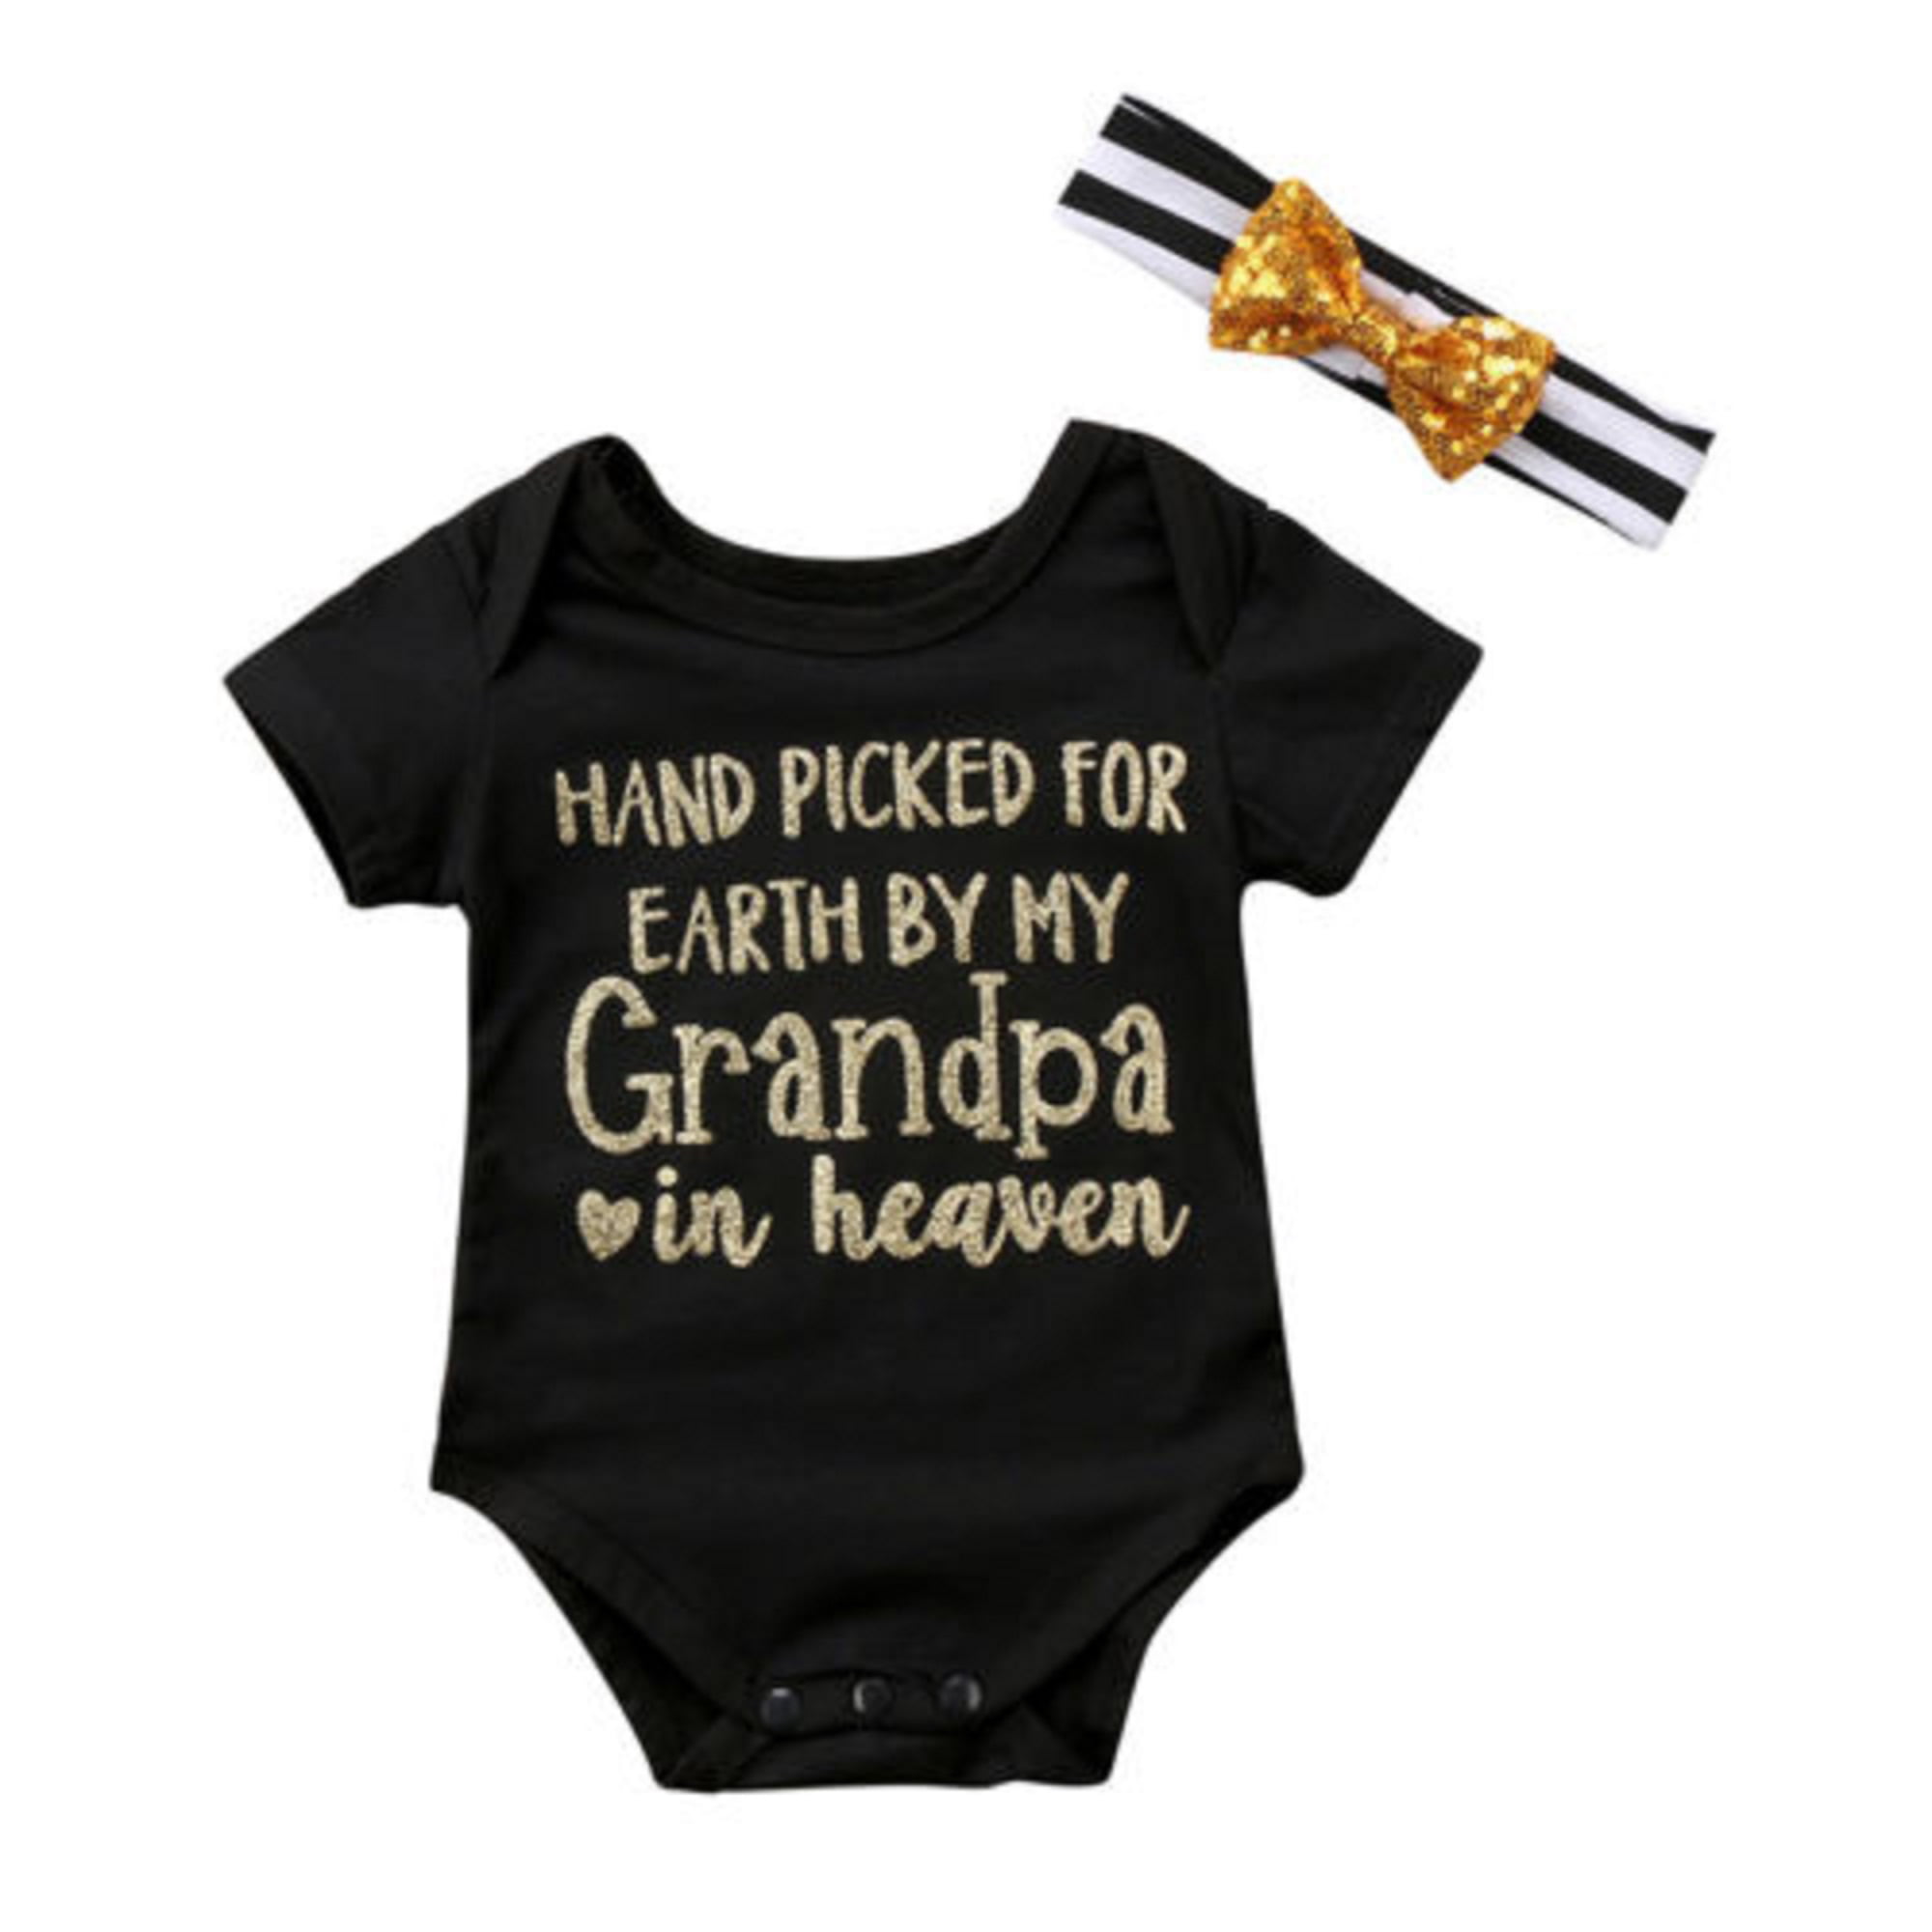 What We Do in The Shadows Newborn Baby Cotton Shortsleeve Bodysuits Jumpsuits Black